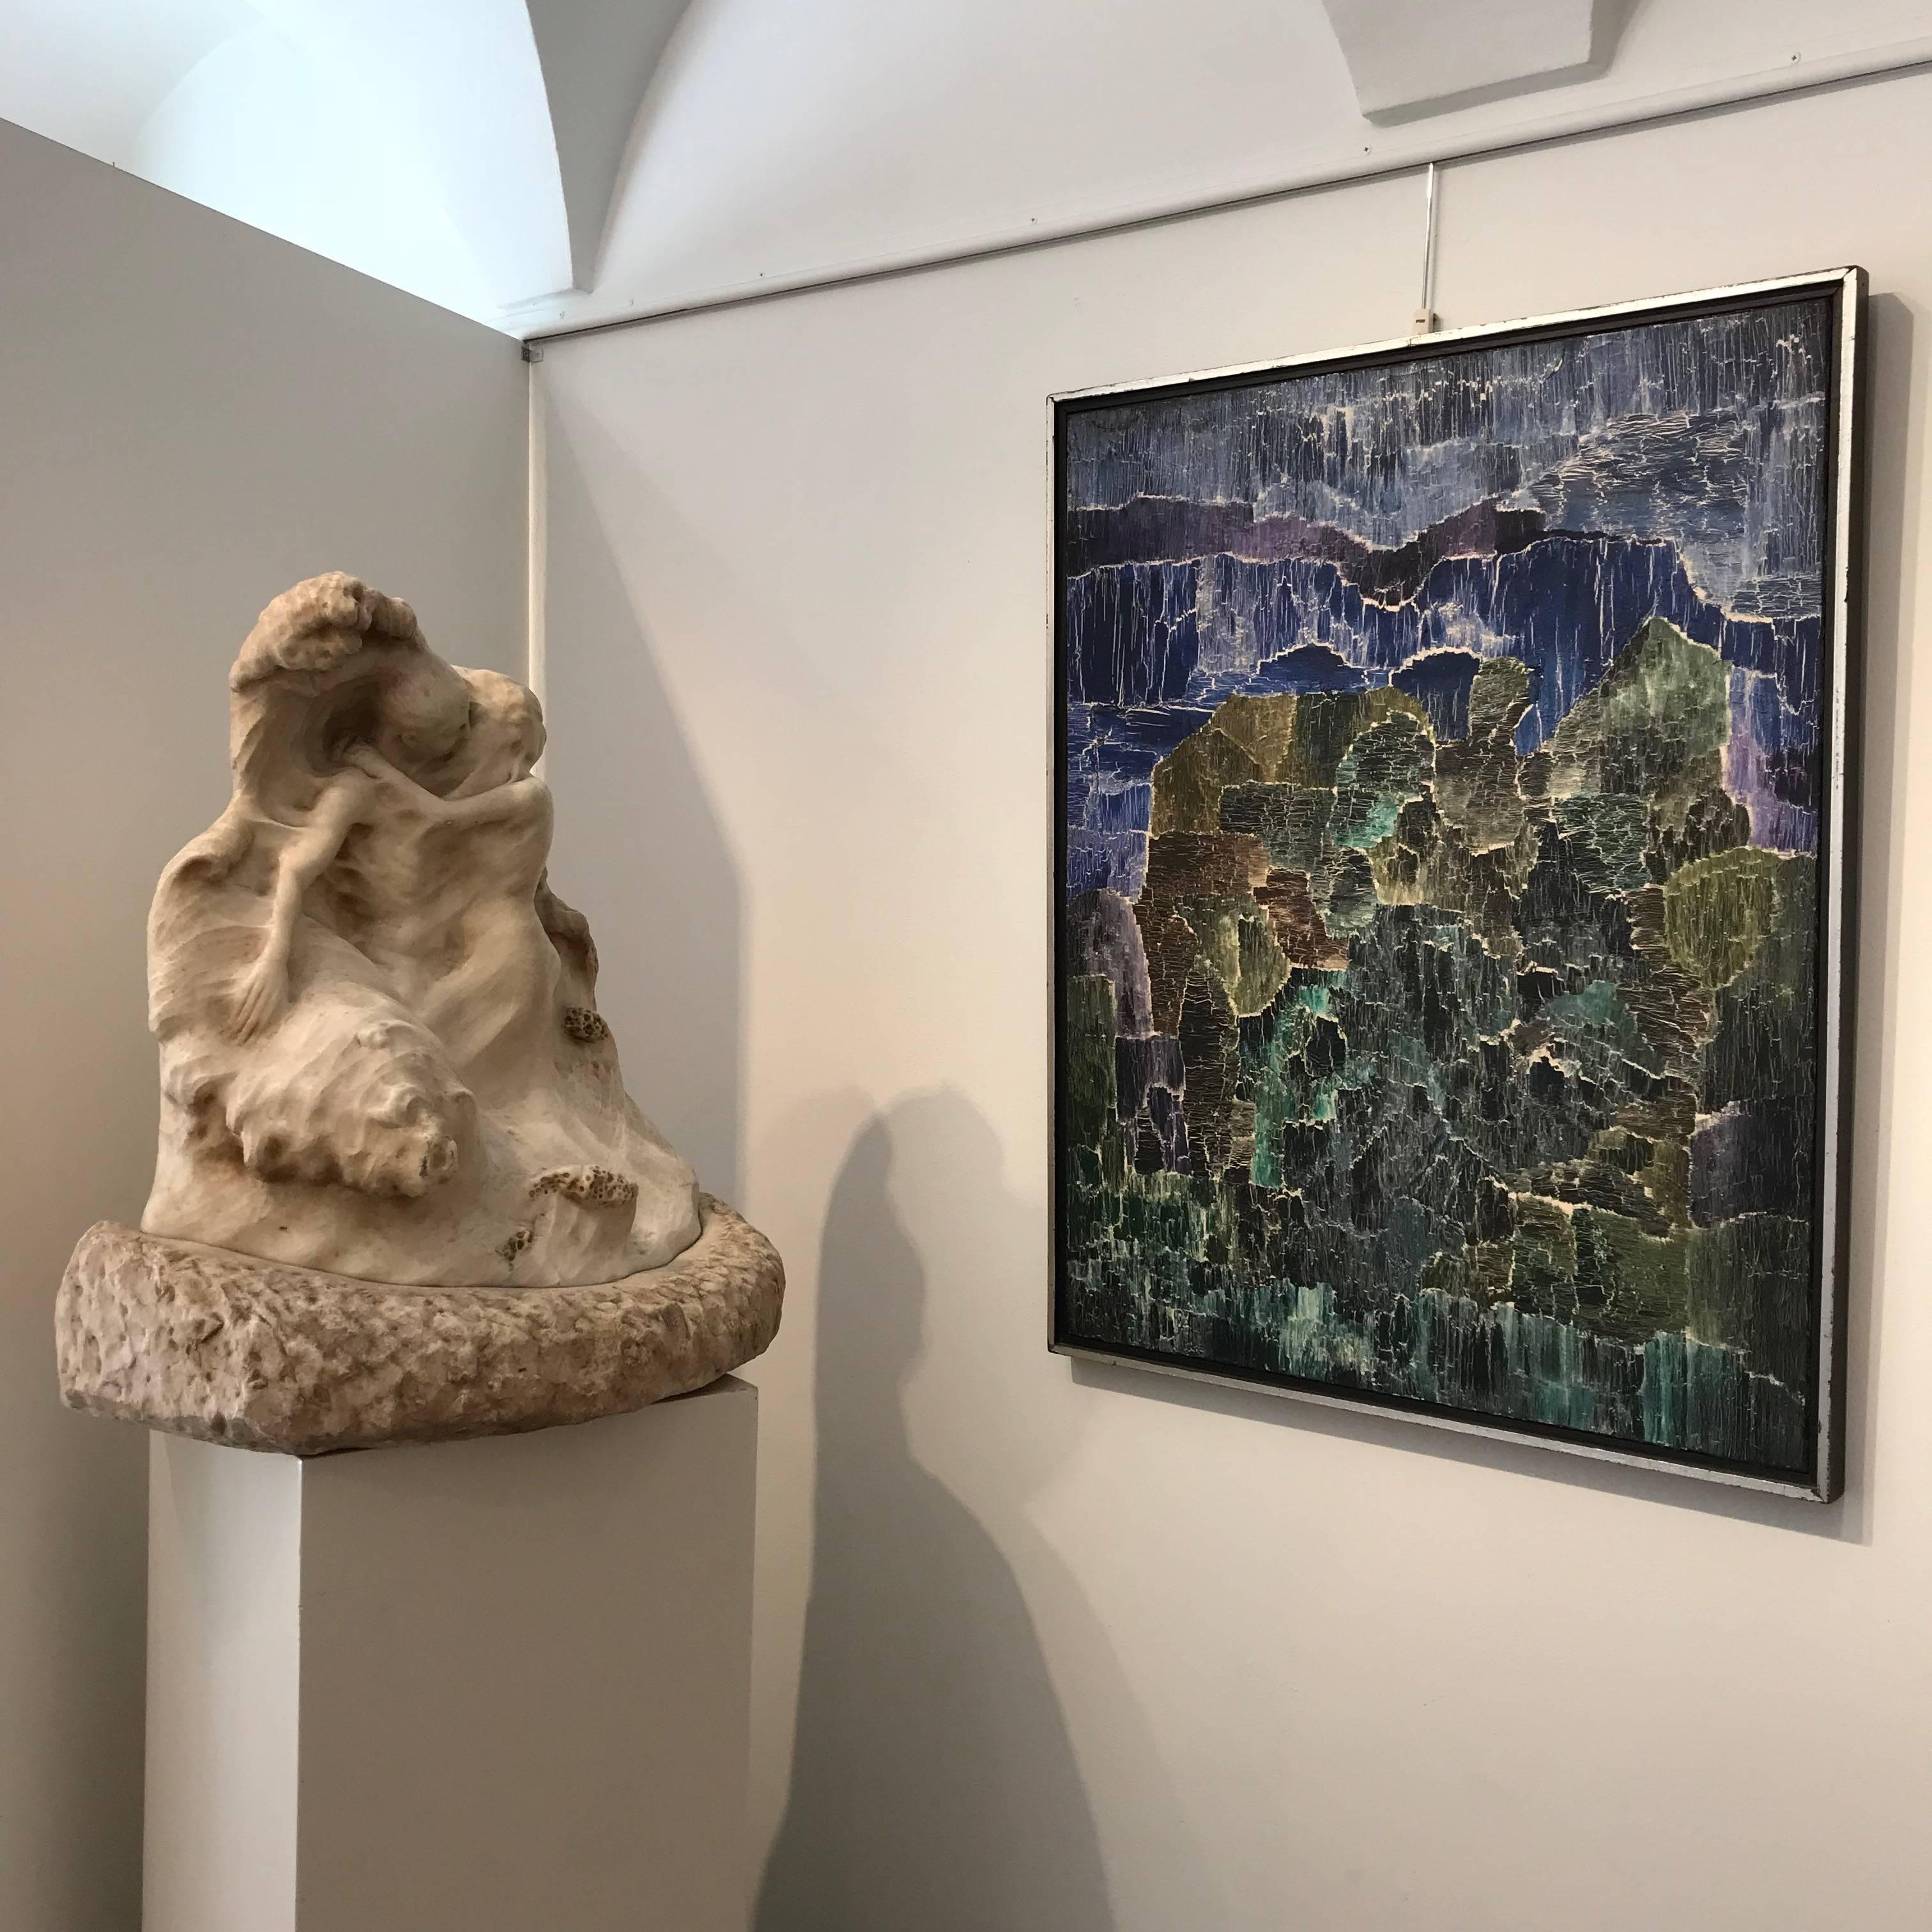 Siegfried Laske (1931-2012) Aluvion, 1971, oil and mixed media on canvas, signed, dated and titled on the verse.

SIZE: cm. 92 x 72 x 2
SIZE WITH FRAME: cm. 96 x 76 x 4

Certificate of Authenticity:
Galleria Michelangelo

Provenance:
Bergamo, Italy,